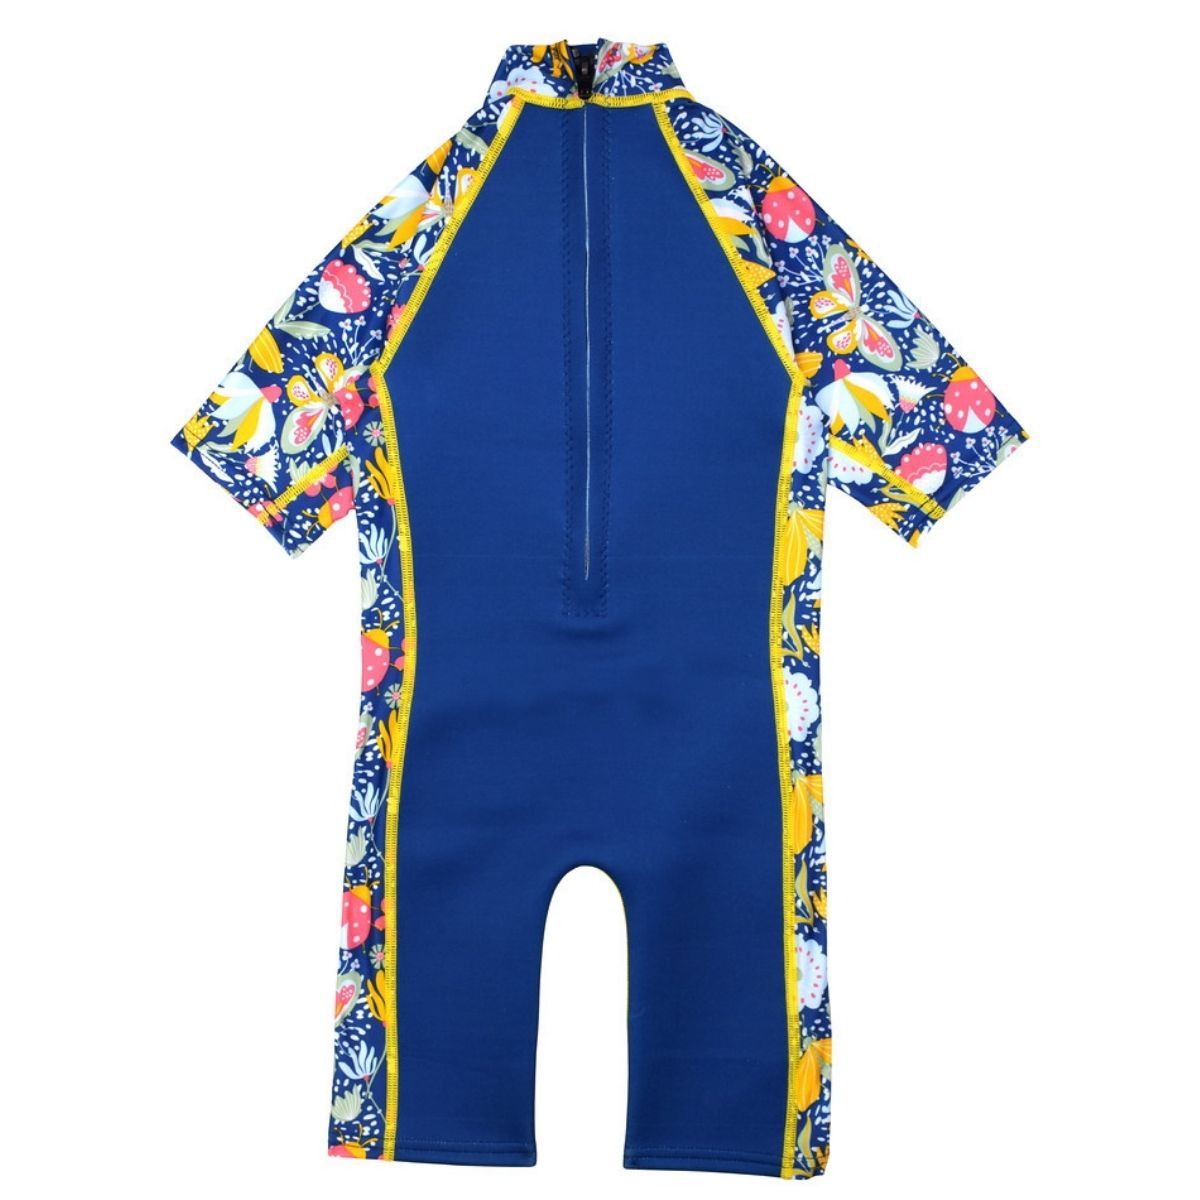 One piece UV sun and sea wetsuit for toddlers in navy blue with yellow trims. Flowers and insects themed print on sleeves, side panels and neck. Back.